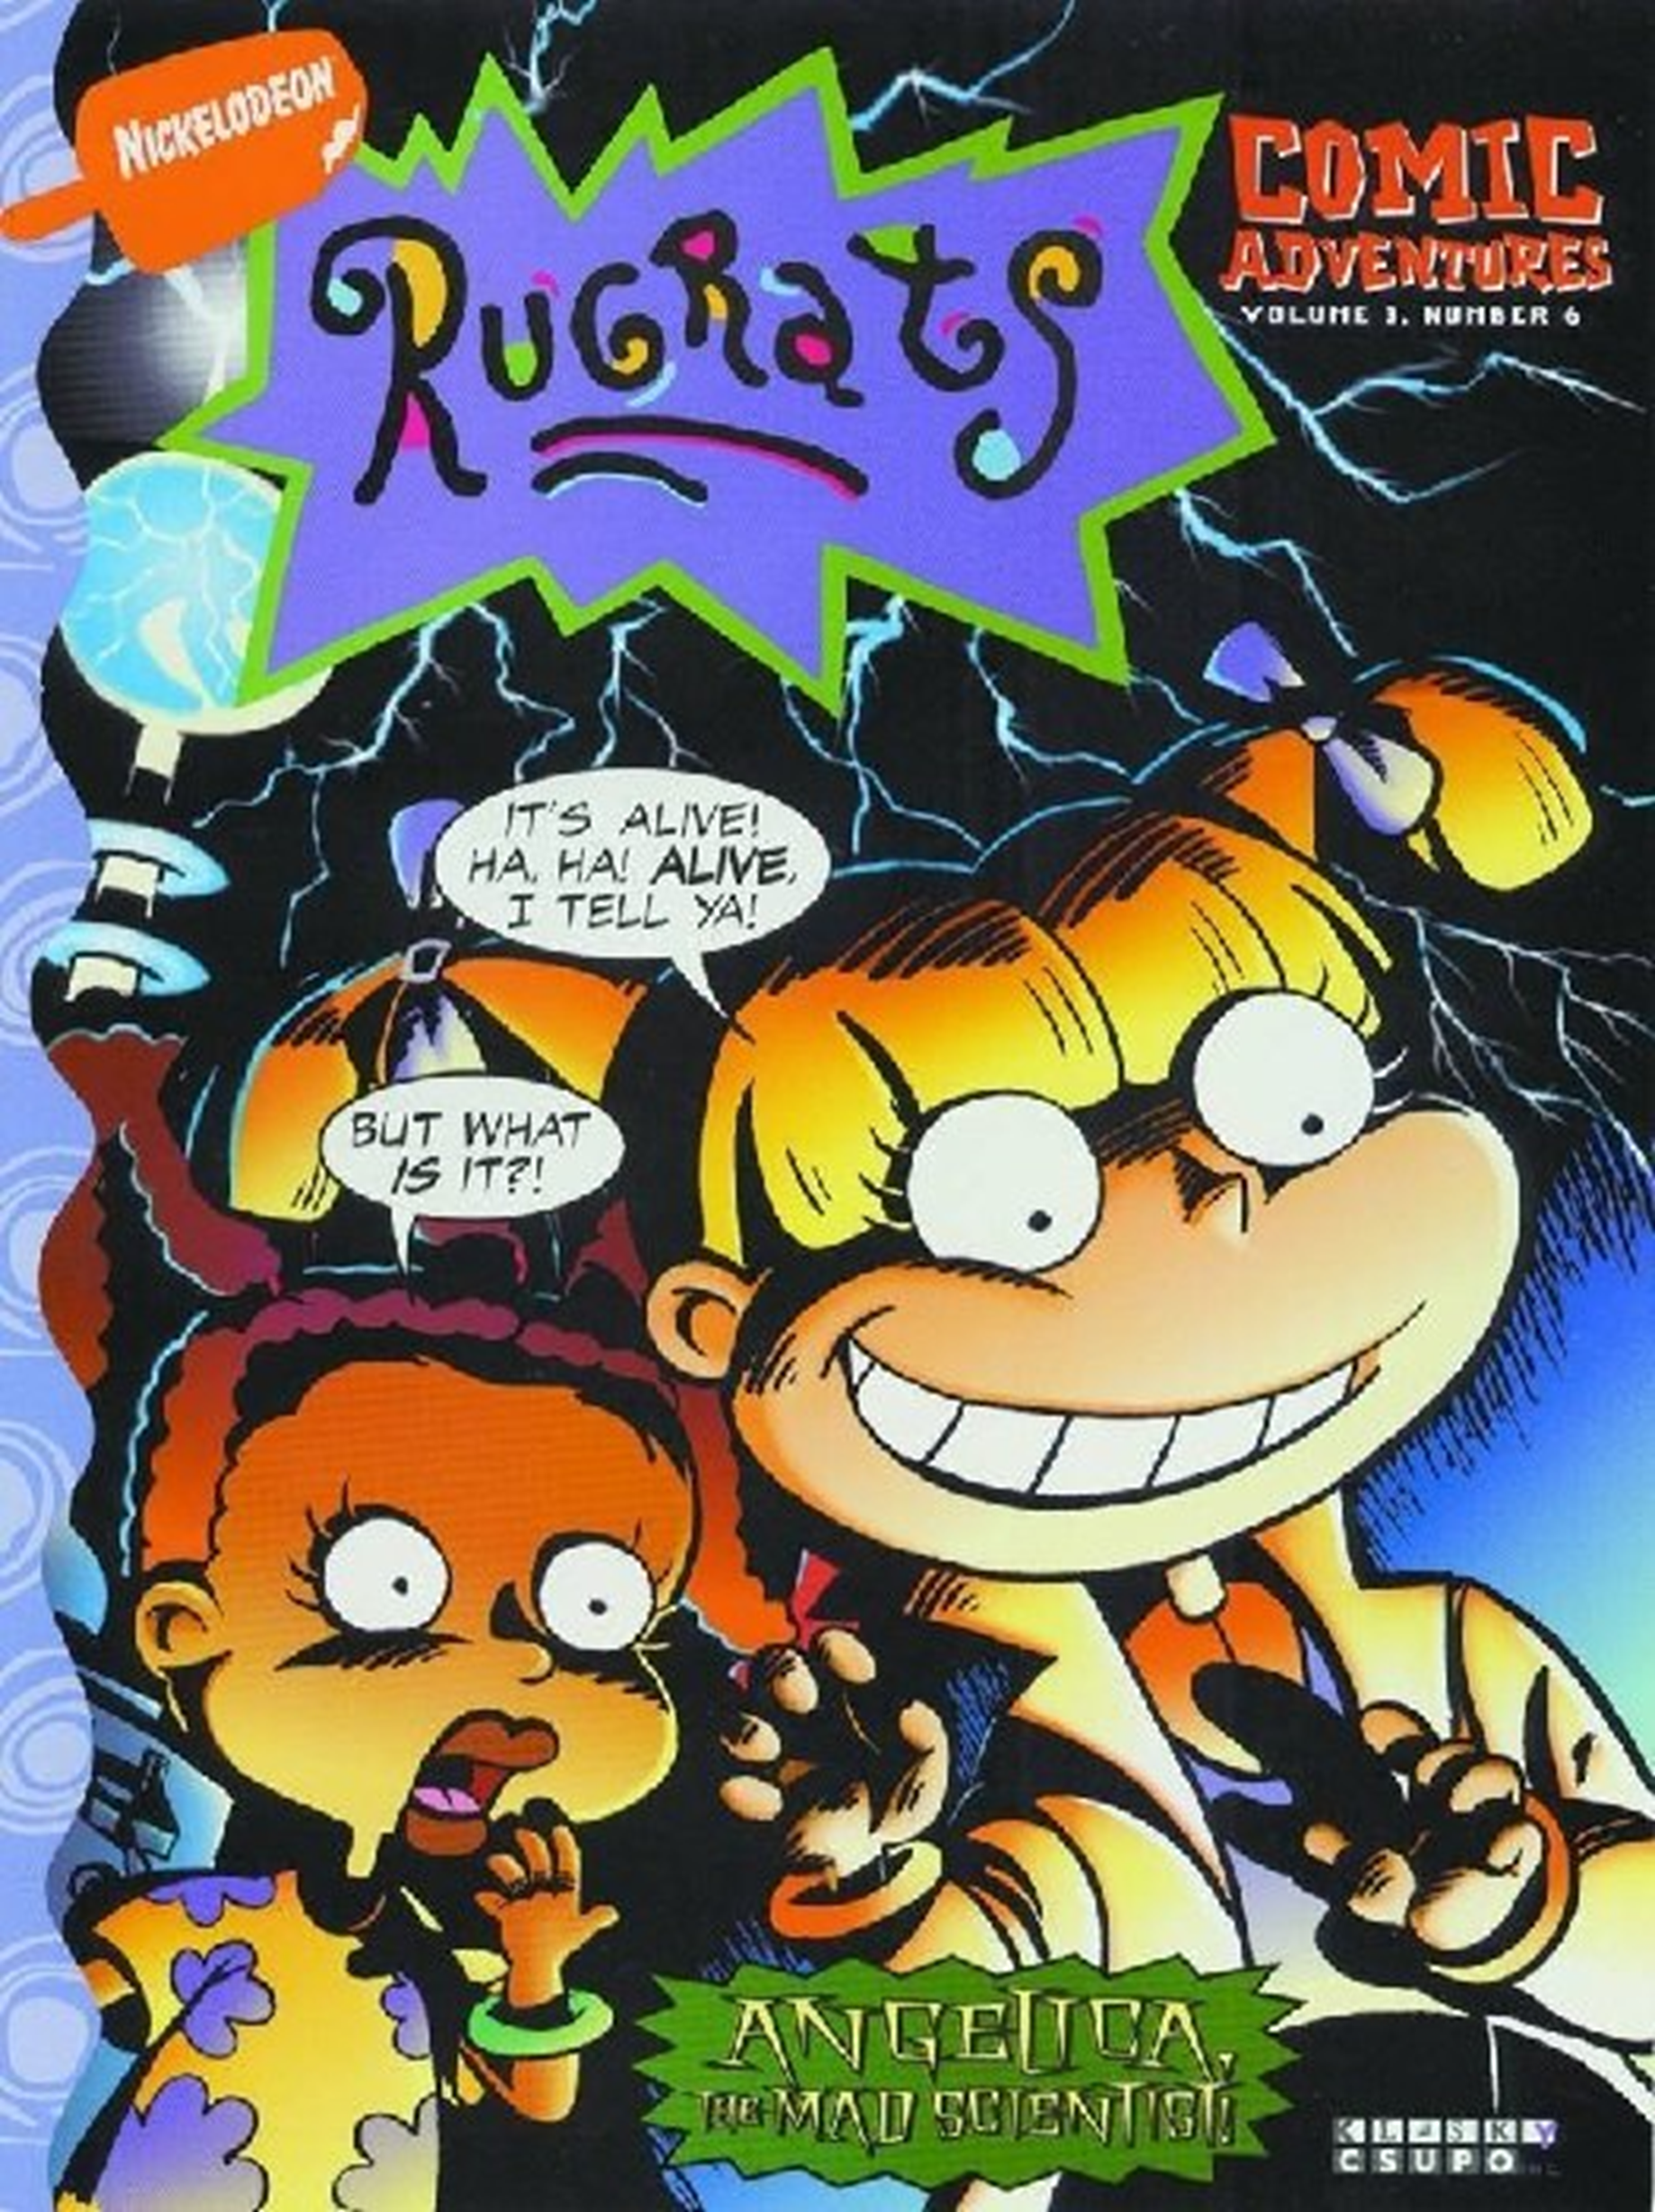 Rugrats Comic Adventures Vol 3 6 Rugrats Wiki Fandom Powered By Wikia 2390